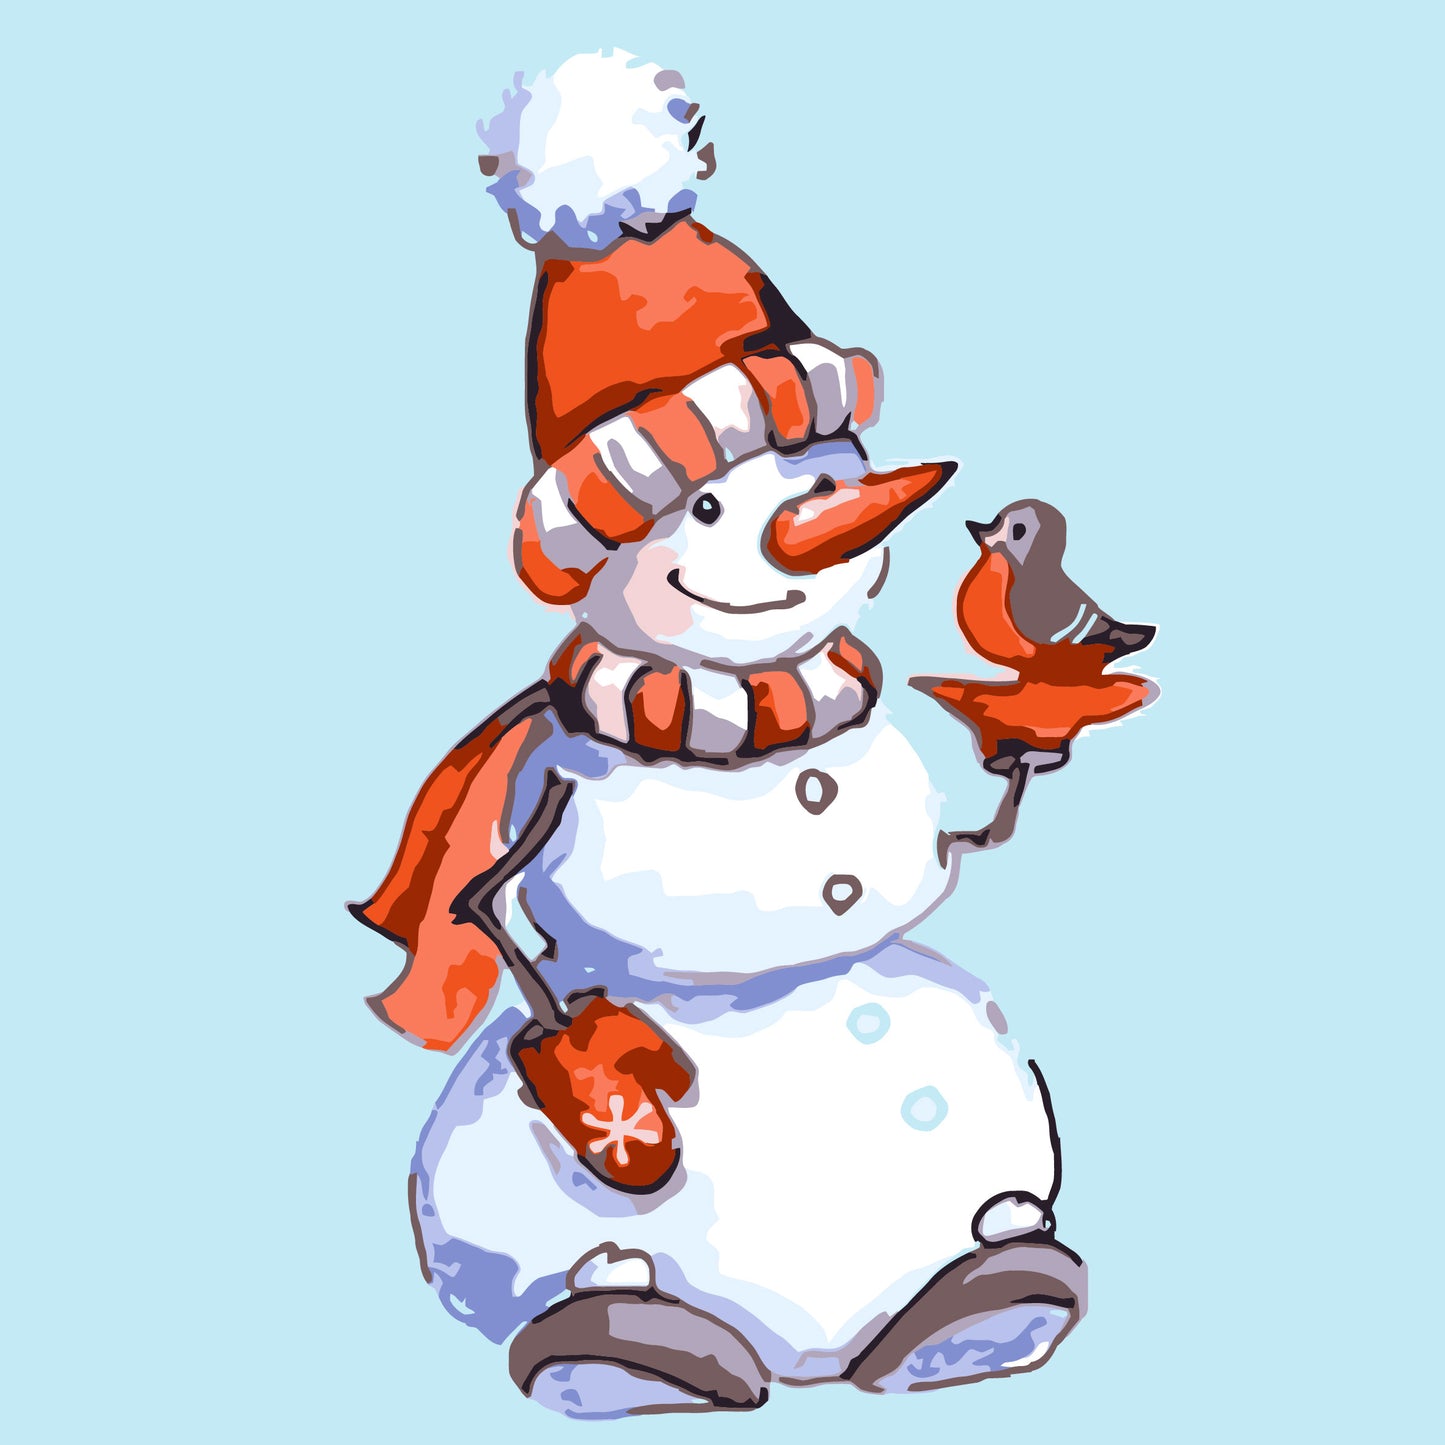 Happy Snowman - Mini Paint by Numbers Kit